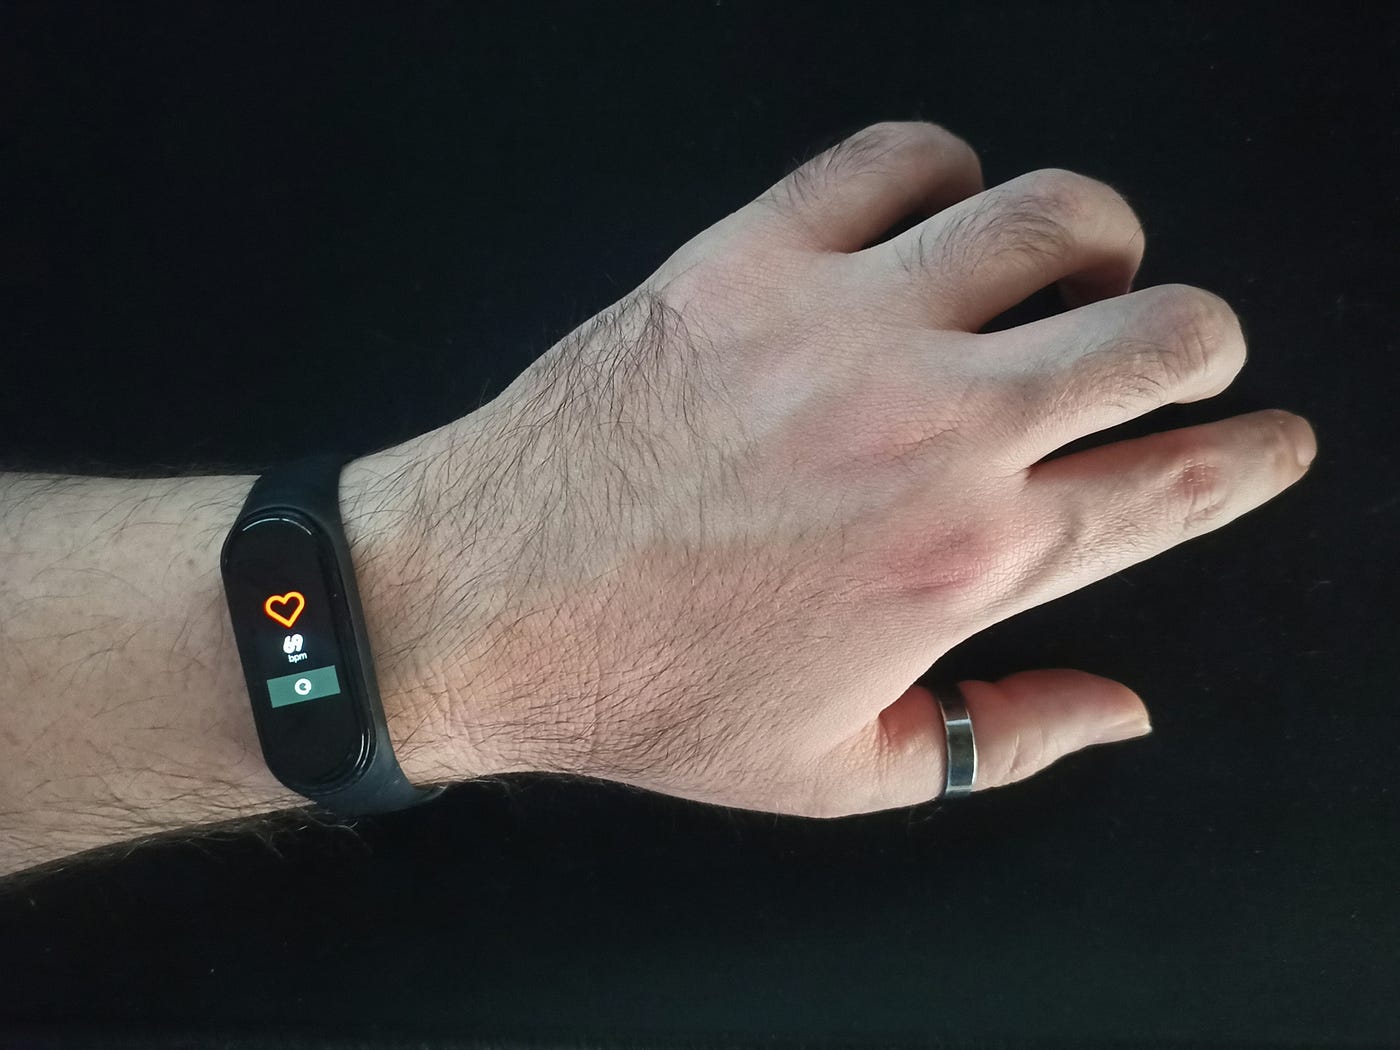 A fitbit on a wrist tracks heart rate during exercise.